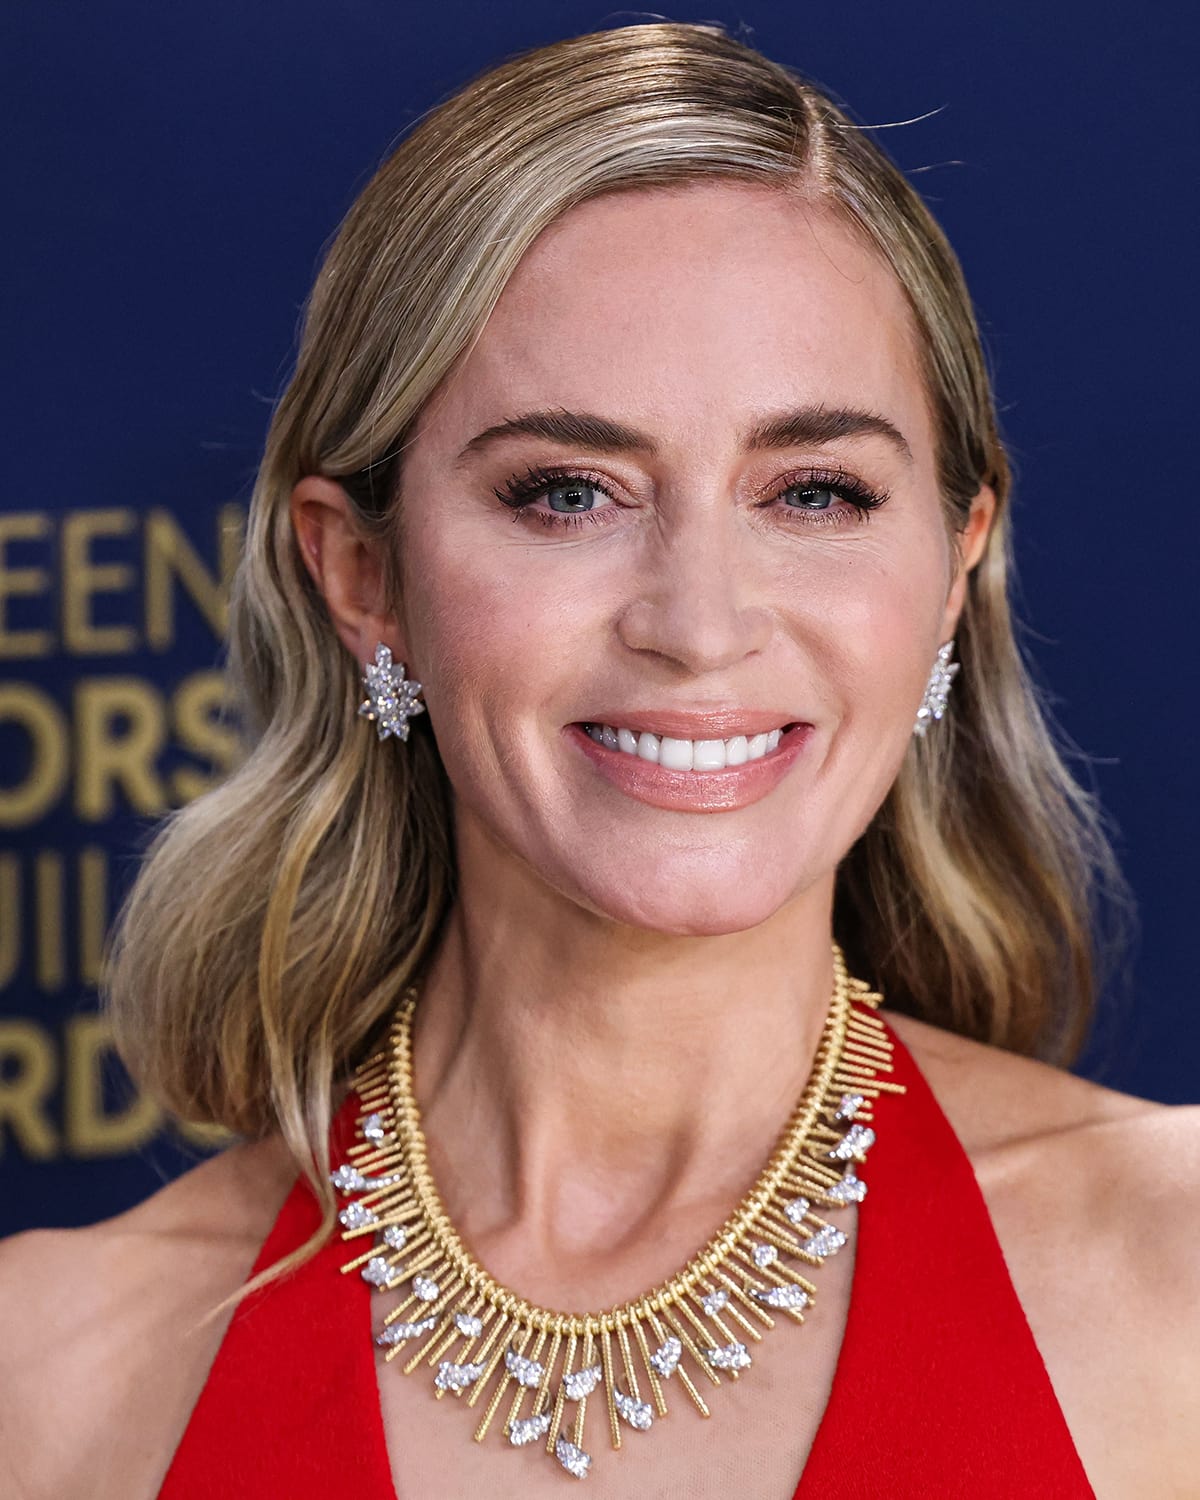 Emily Blunt keeps her glam understated, wearing soft pink makeup and Veronica Lake-esque wavy hairstyle